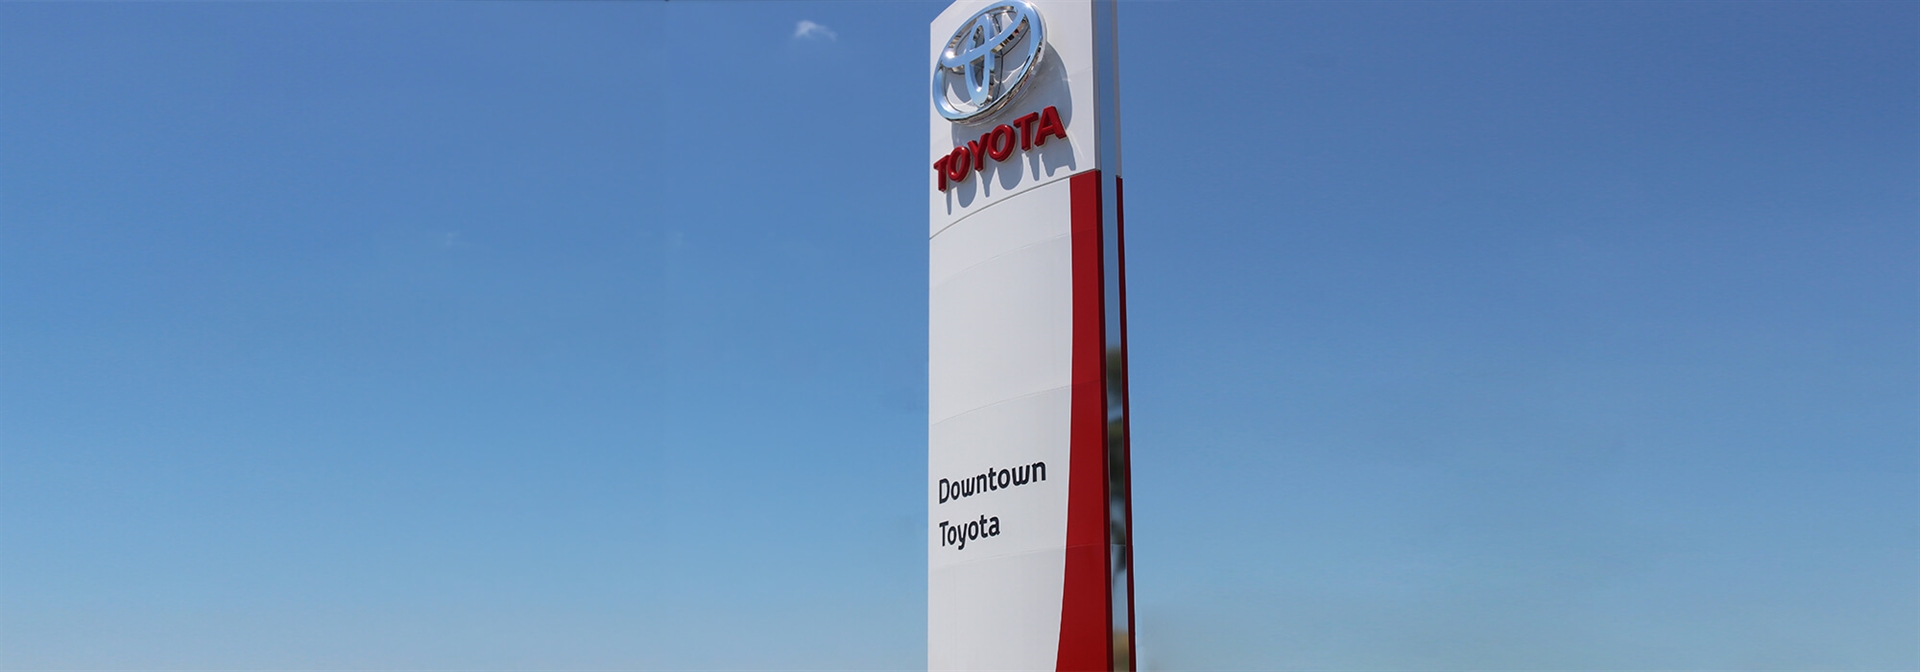 Toyota Supply Update at Downtown Toyota